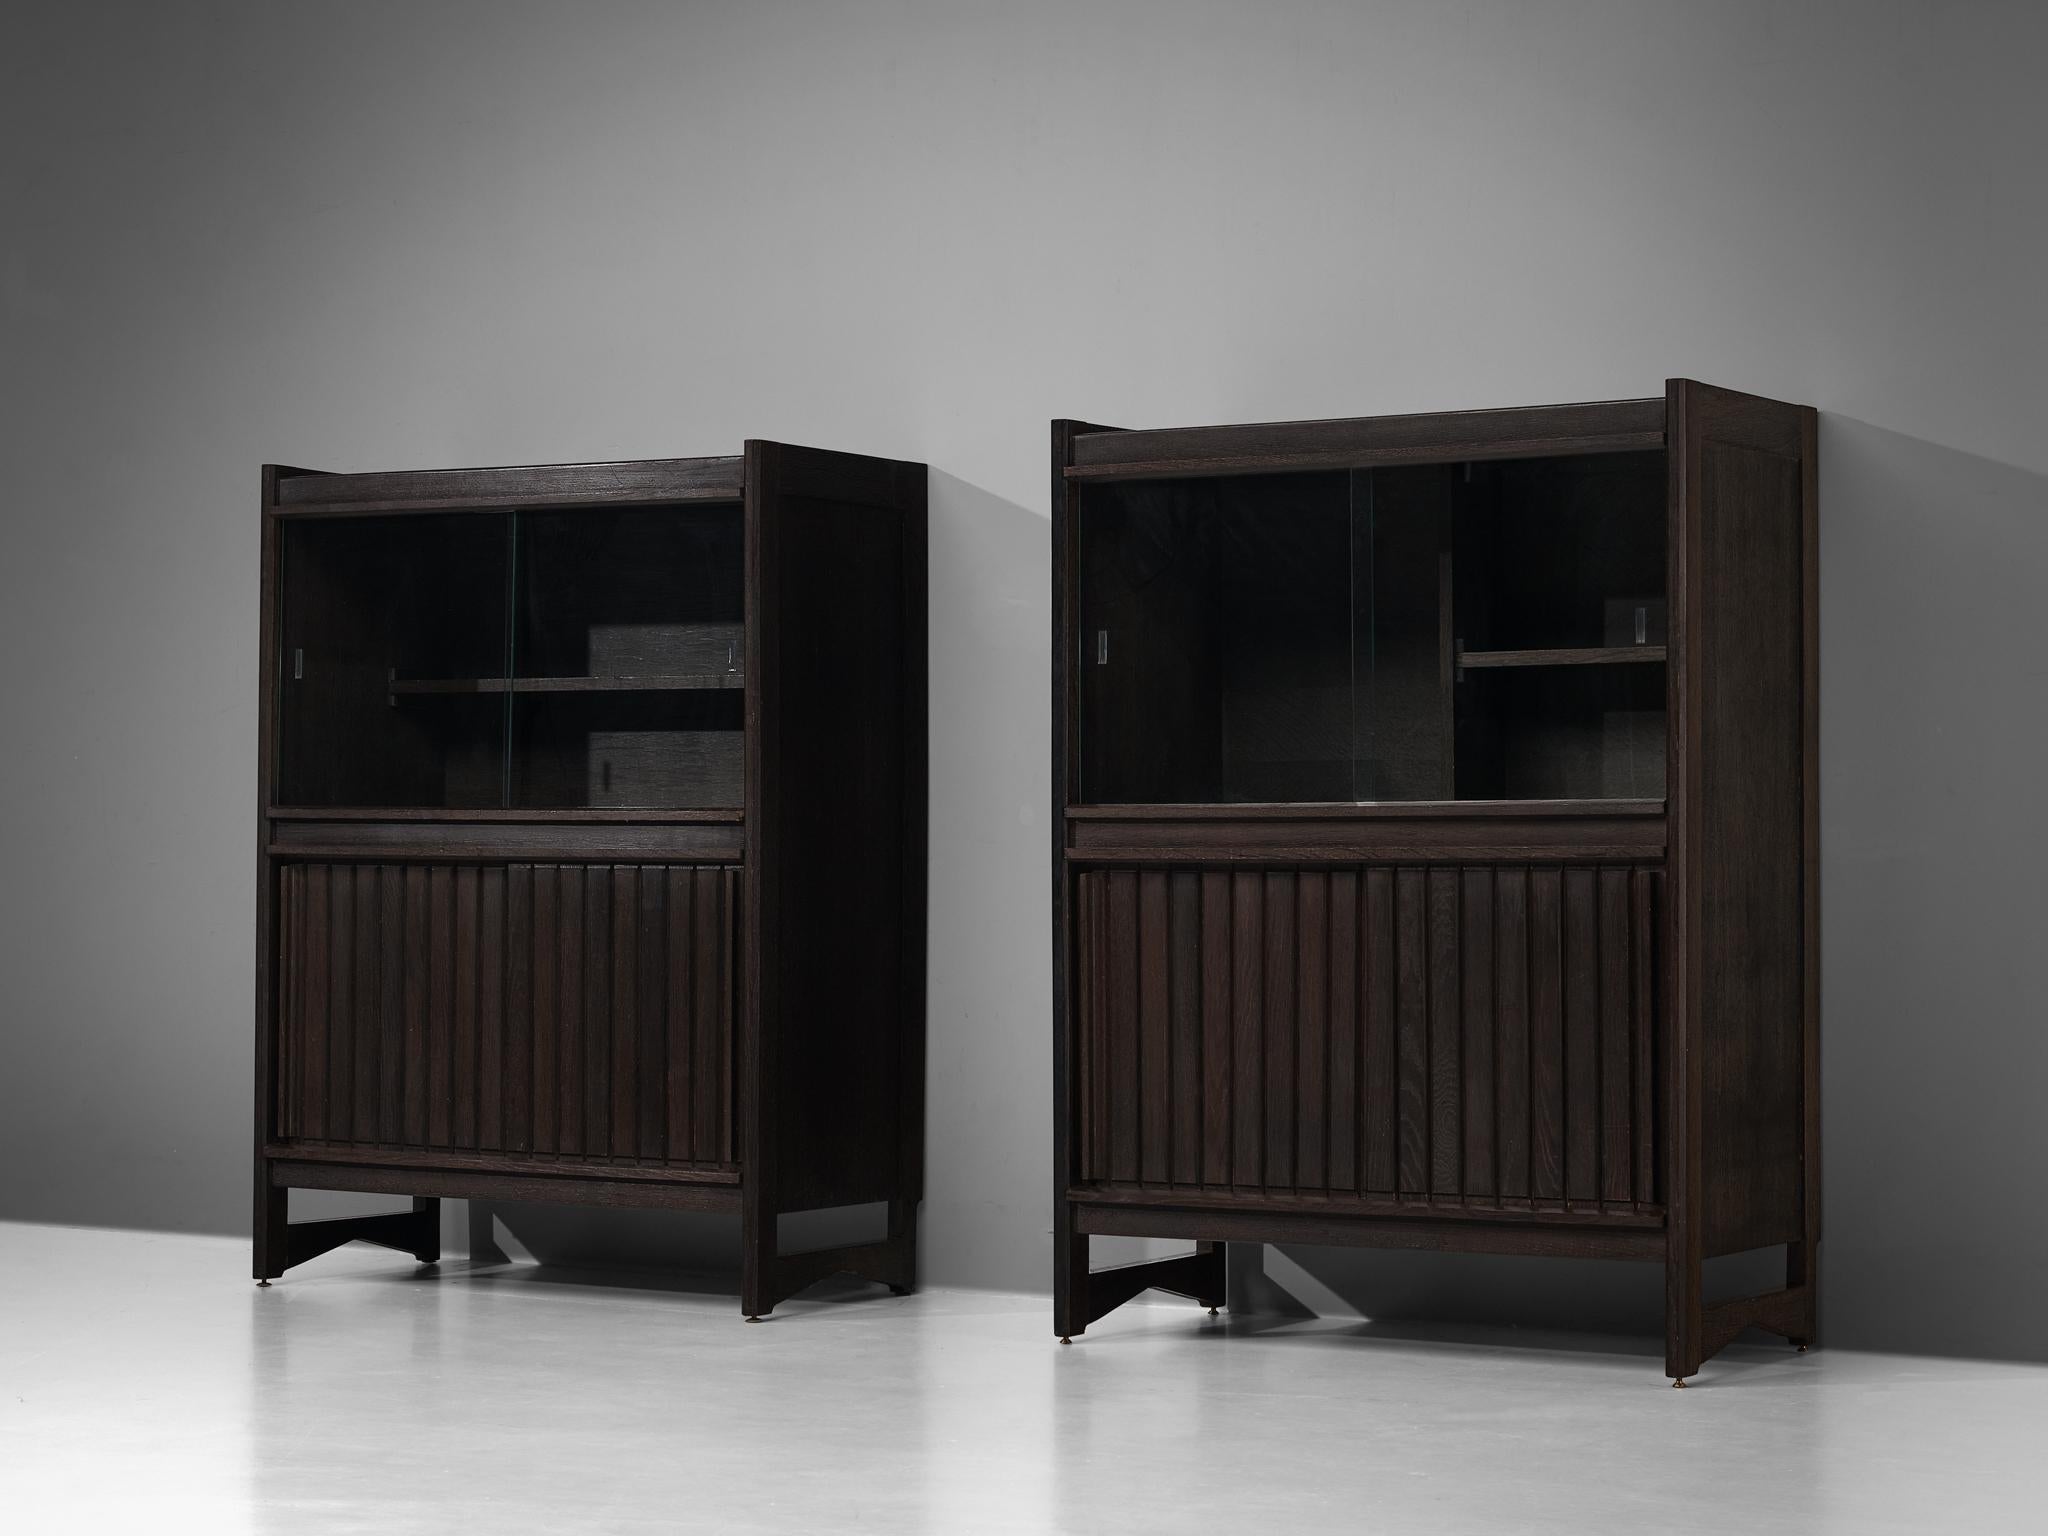 Pair of Guillerme & Chambron, cabinets, oak, glass, France, 1960s

These sculptural cabinets are made by the designer duo Guillerme & Chambron. The piece is executed in solid, stained oak and features sculptural lines and edges. The piece holds